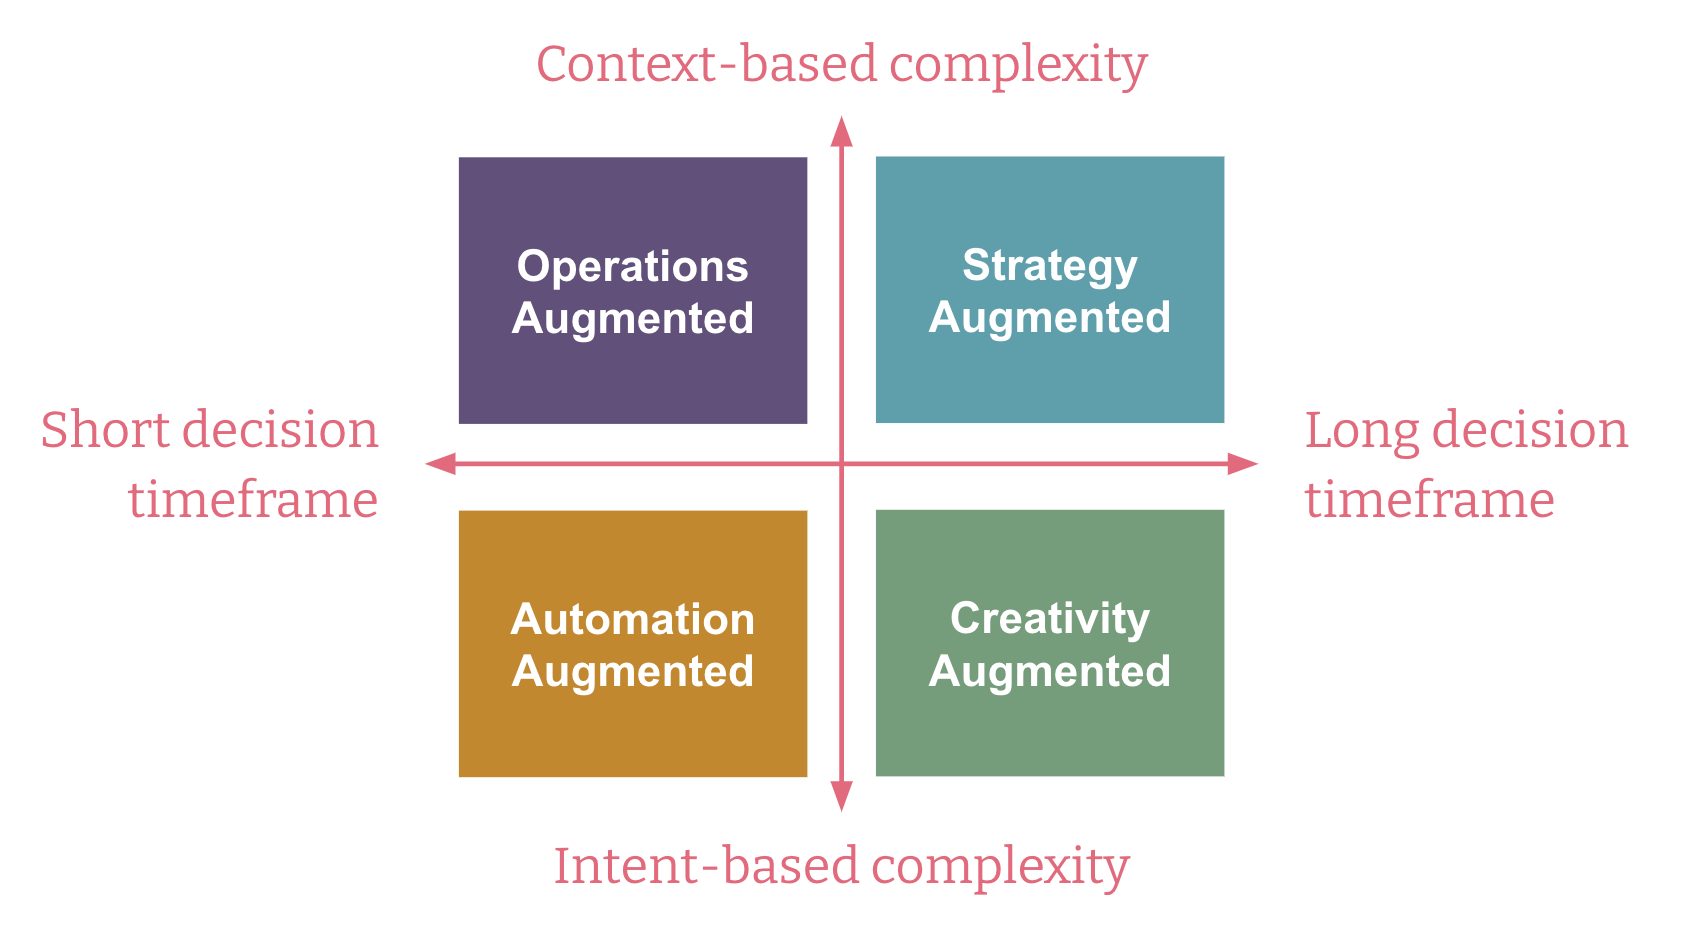 Diagram showing the four AI: Augmented approach, one for each quadrant of the decision spectrum, defined by the axes of context/intent-based complexity and decision timeframe. 